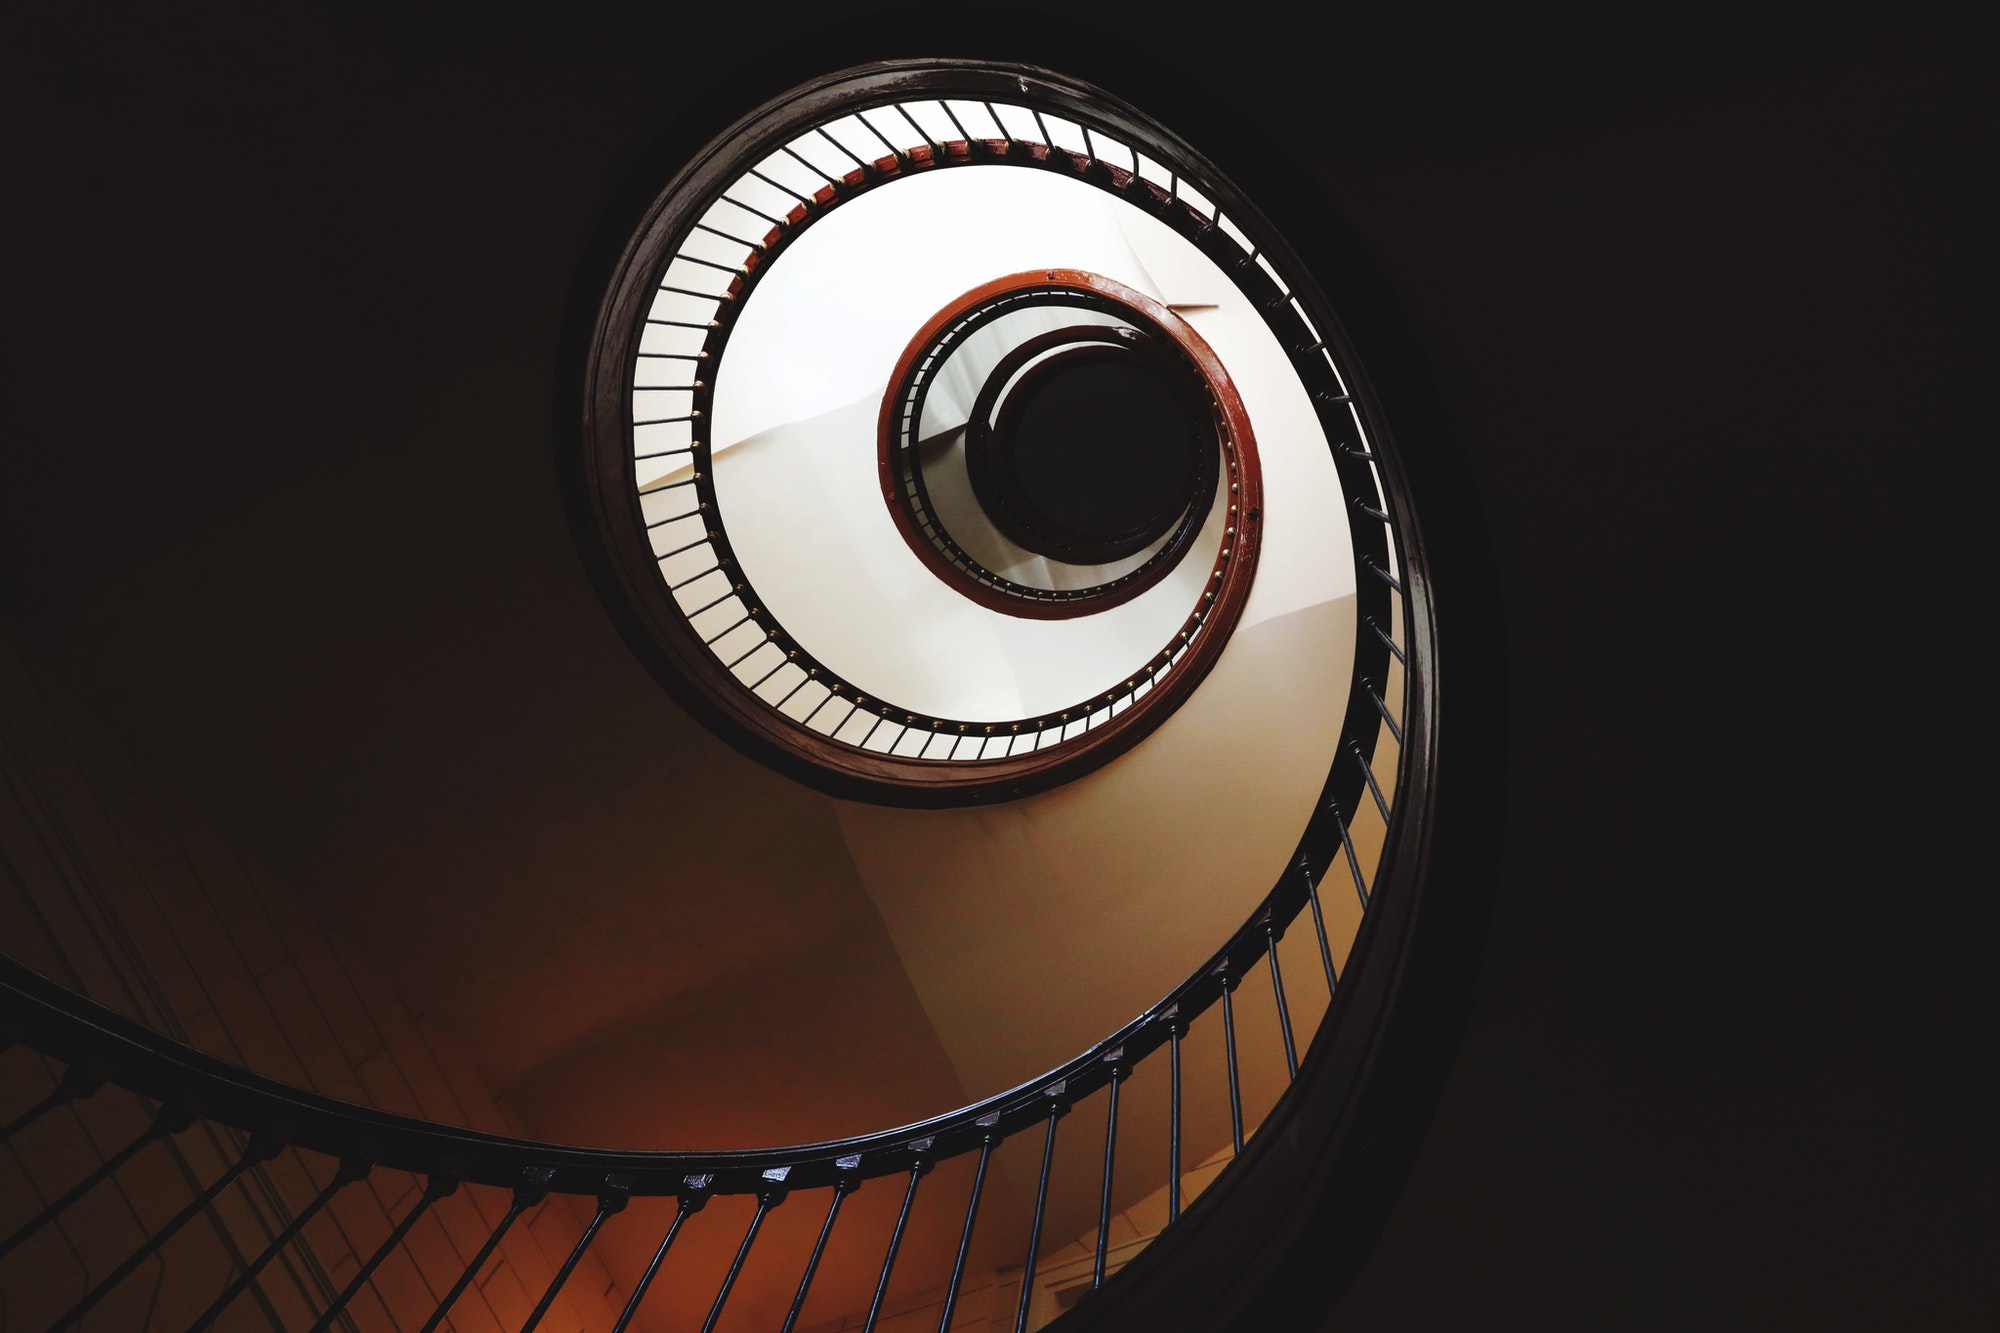 An abstract shot of a spiral staircase